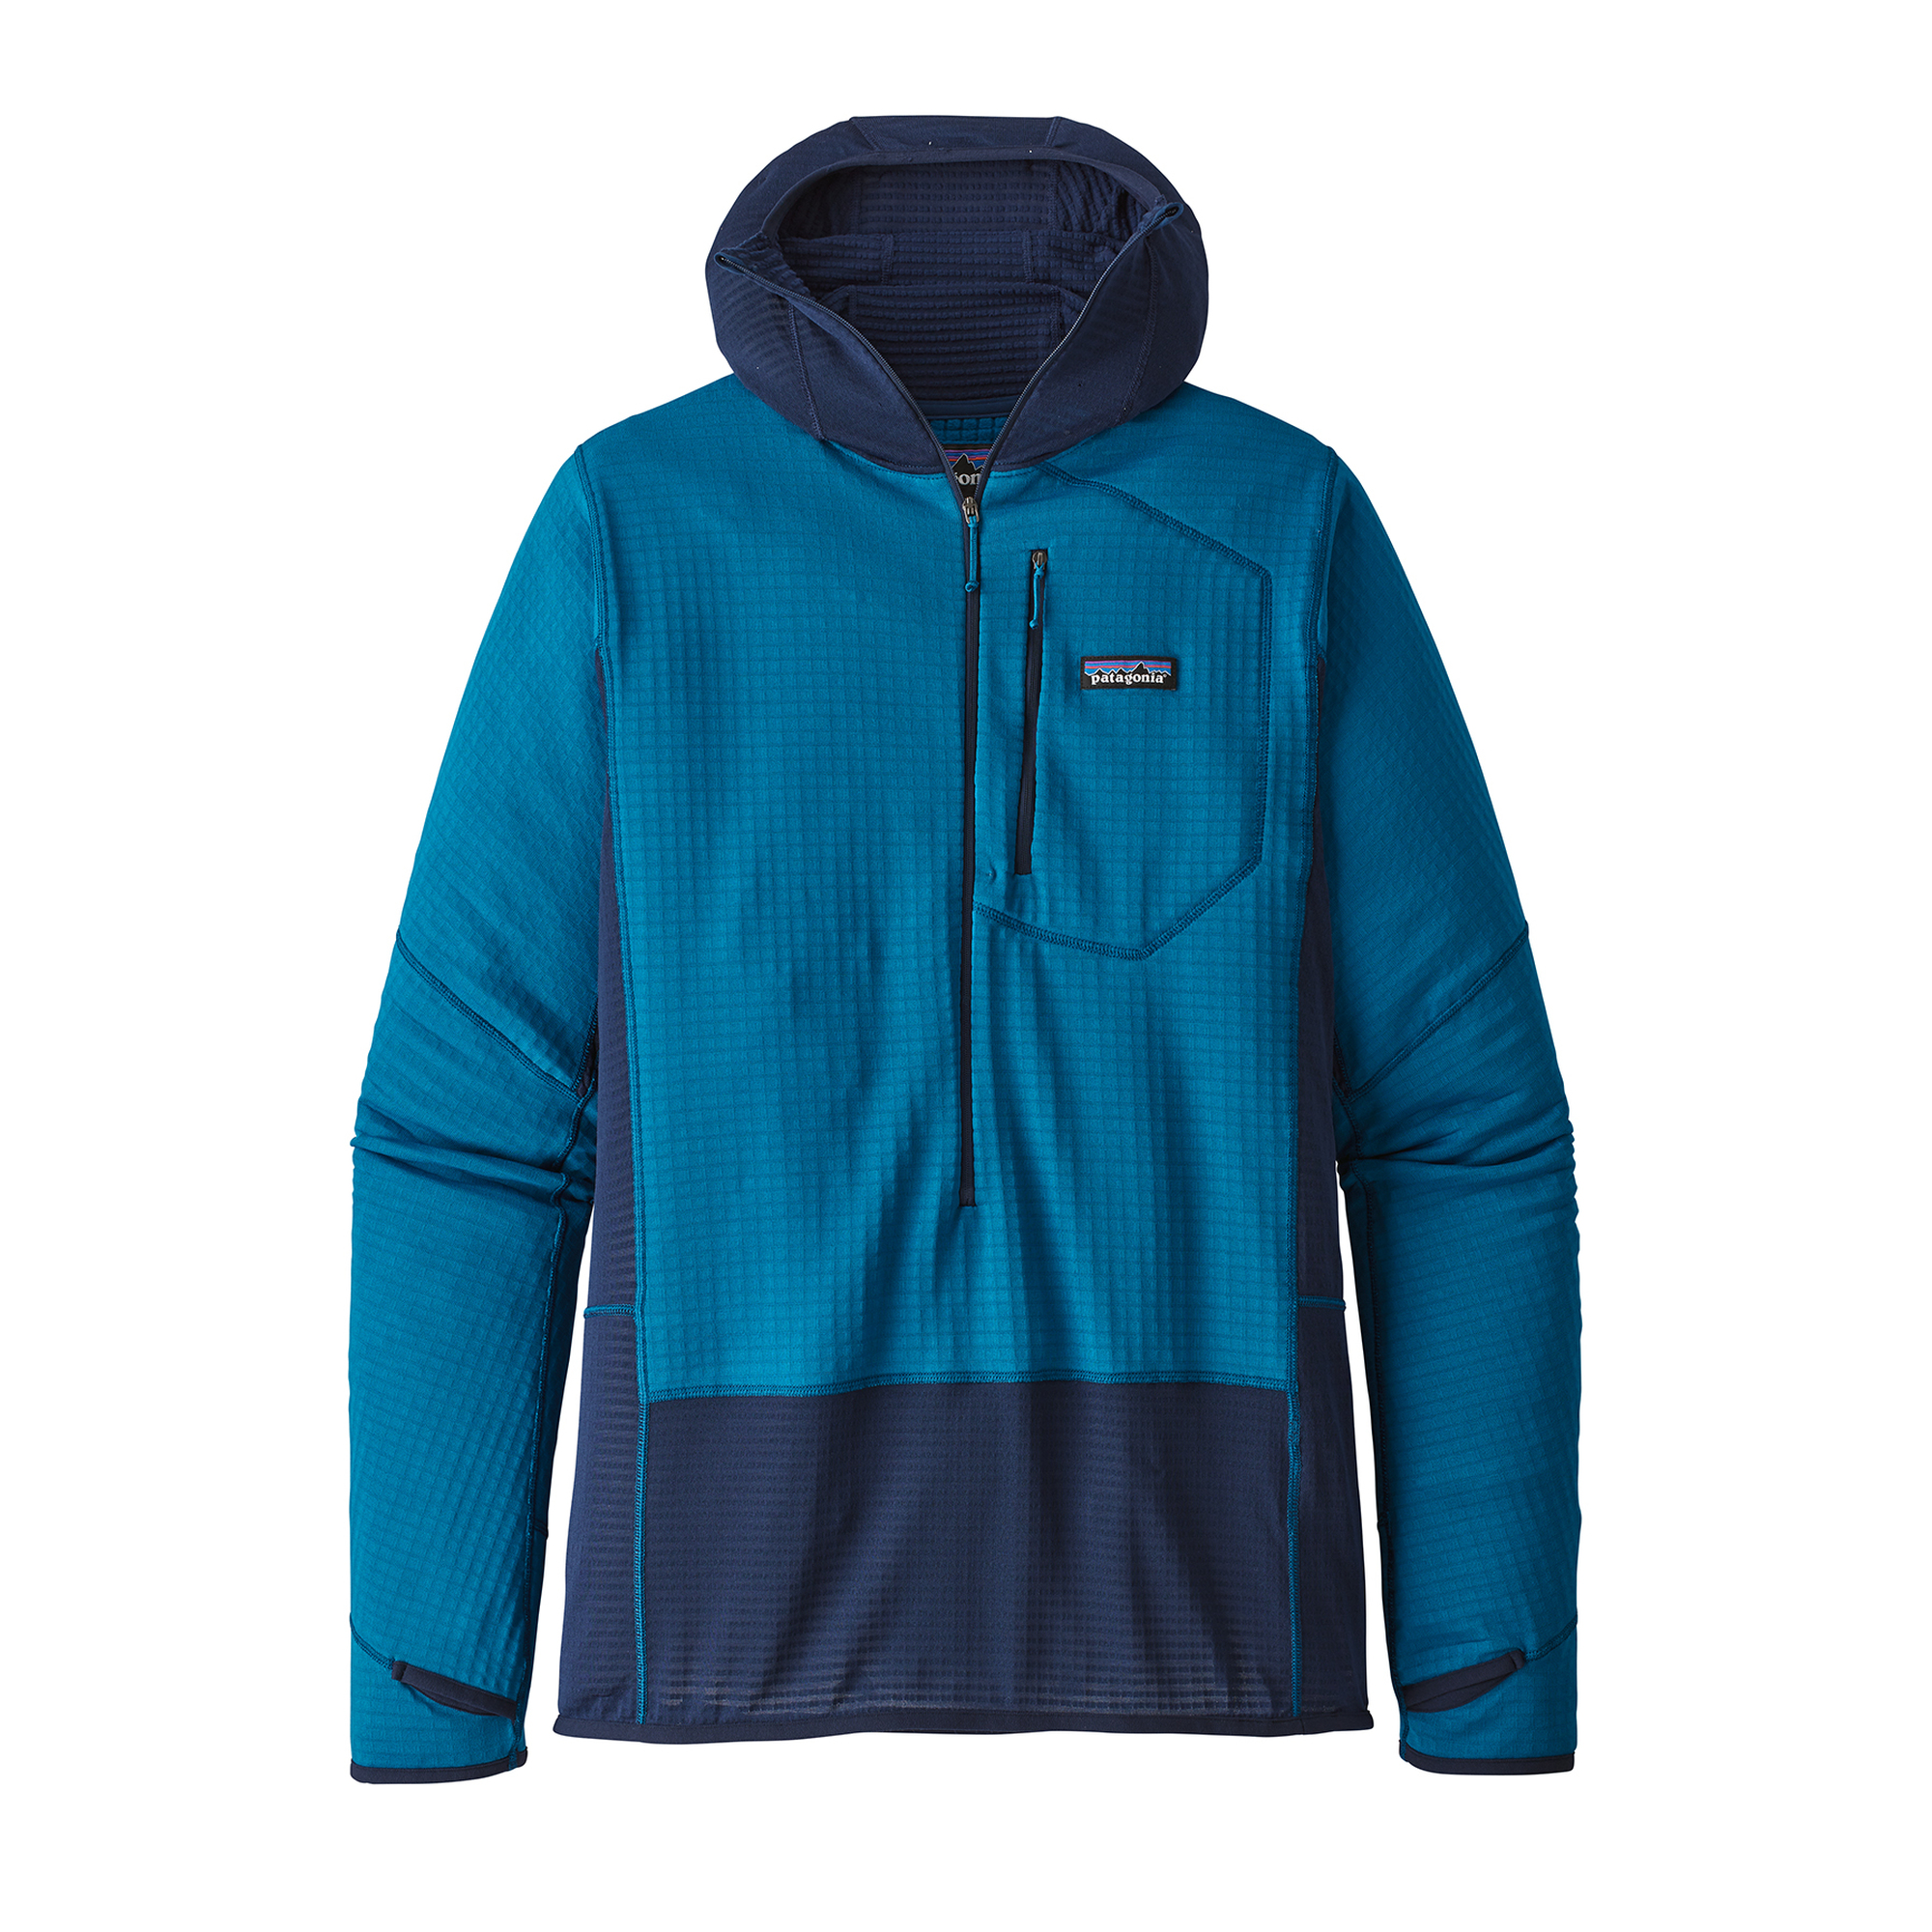 Tested on tour: Patagonia R1 Fleece Pullover Hoody